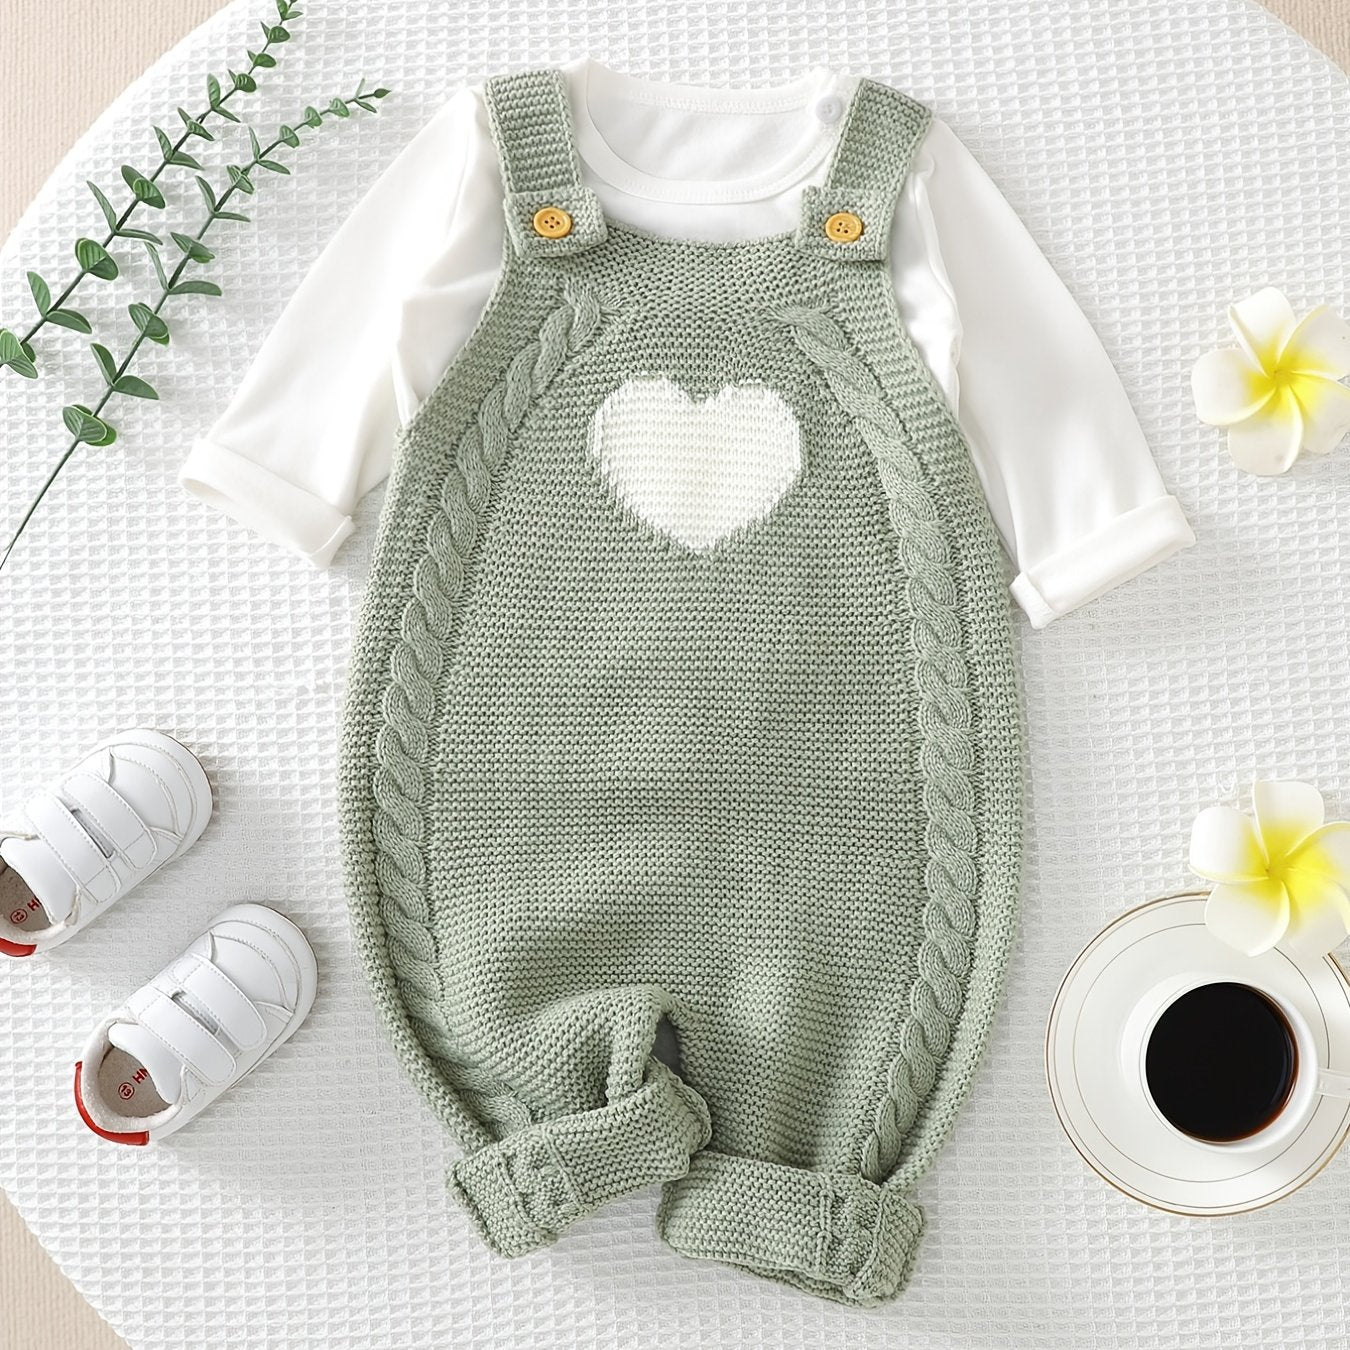 Unisex Baby Knit One Piece, Heart Pattern Overalls, Knit Bib Pants, Sleeveless Jumpsuit For Winter Baby Clothes